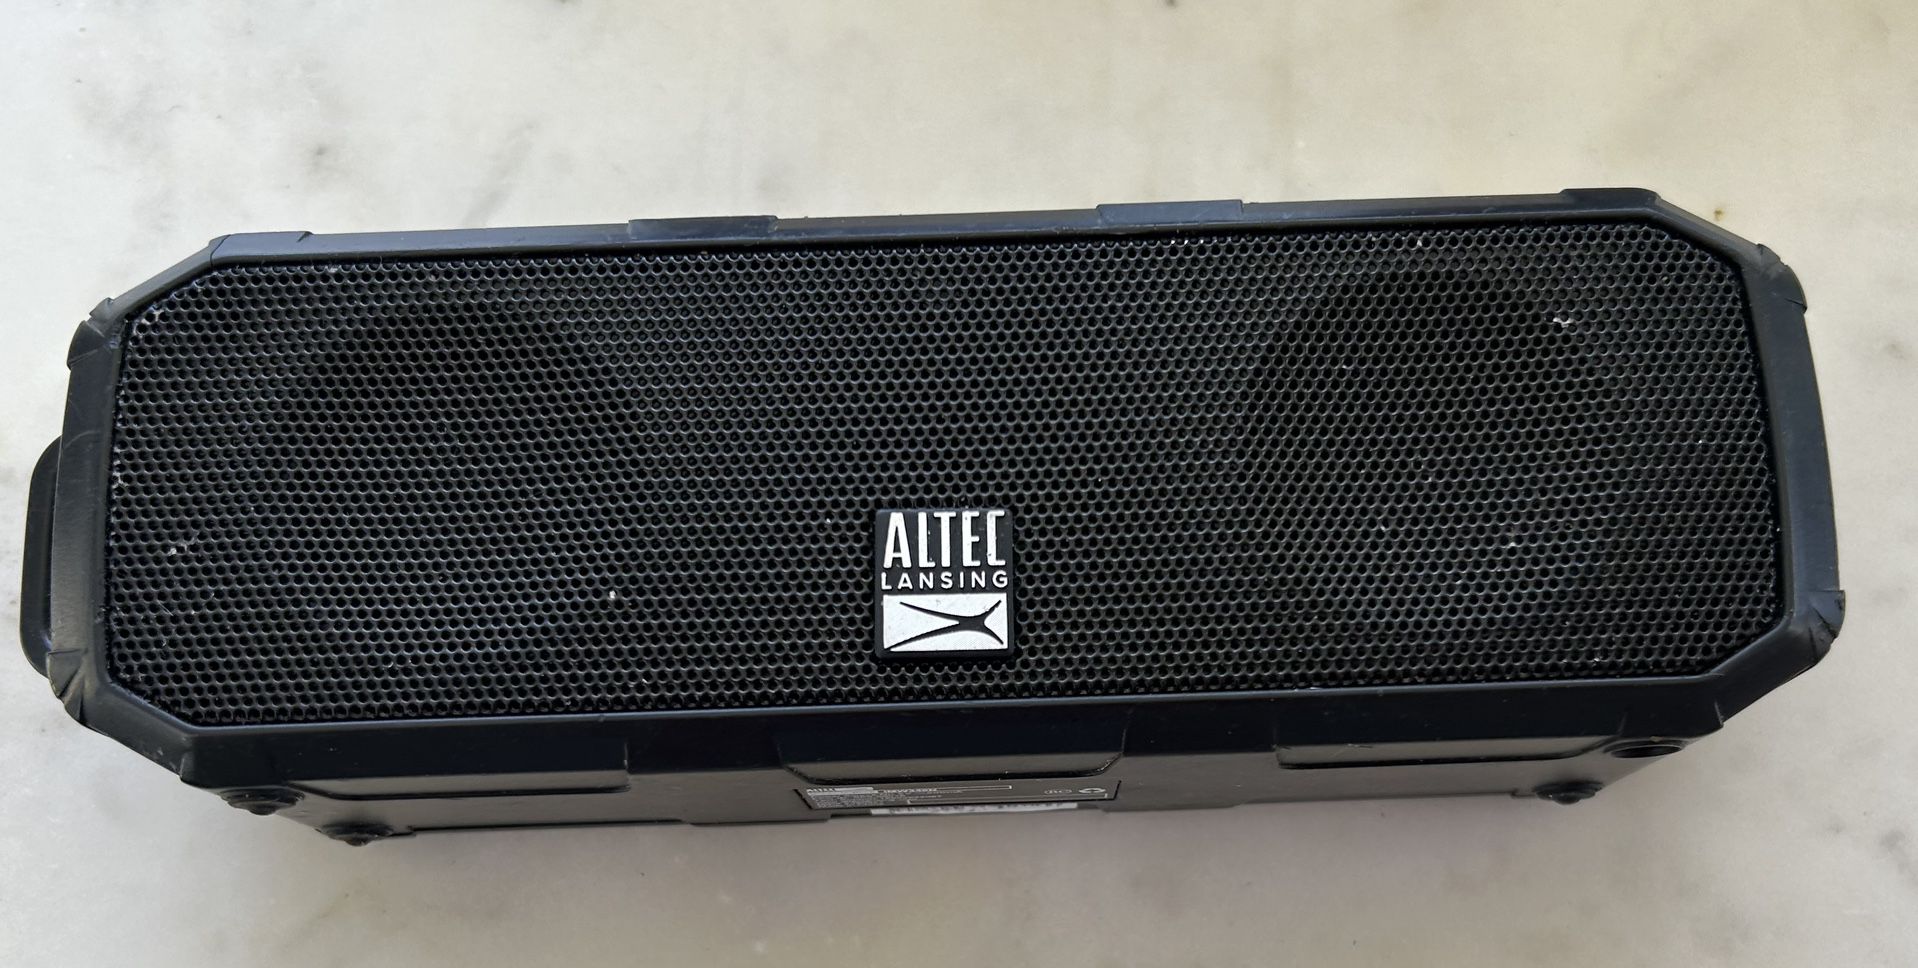 Altec Lansing LifeJacket H2O 4 - Waterproof Bluetooth Speaker, Durable & Portable Speaker with Voice Assistant, 10 Hour Battery Life & 100 Foot Range,